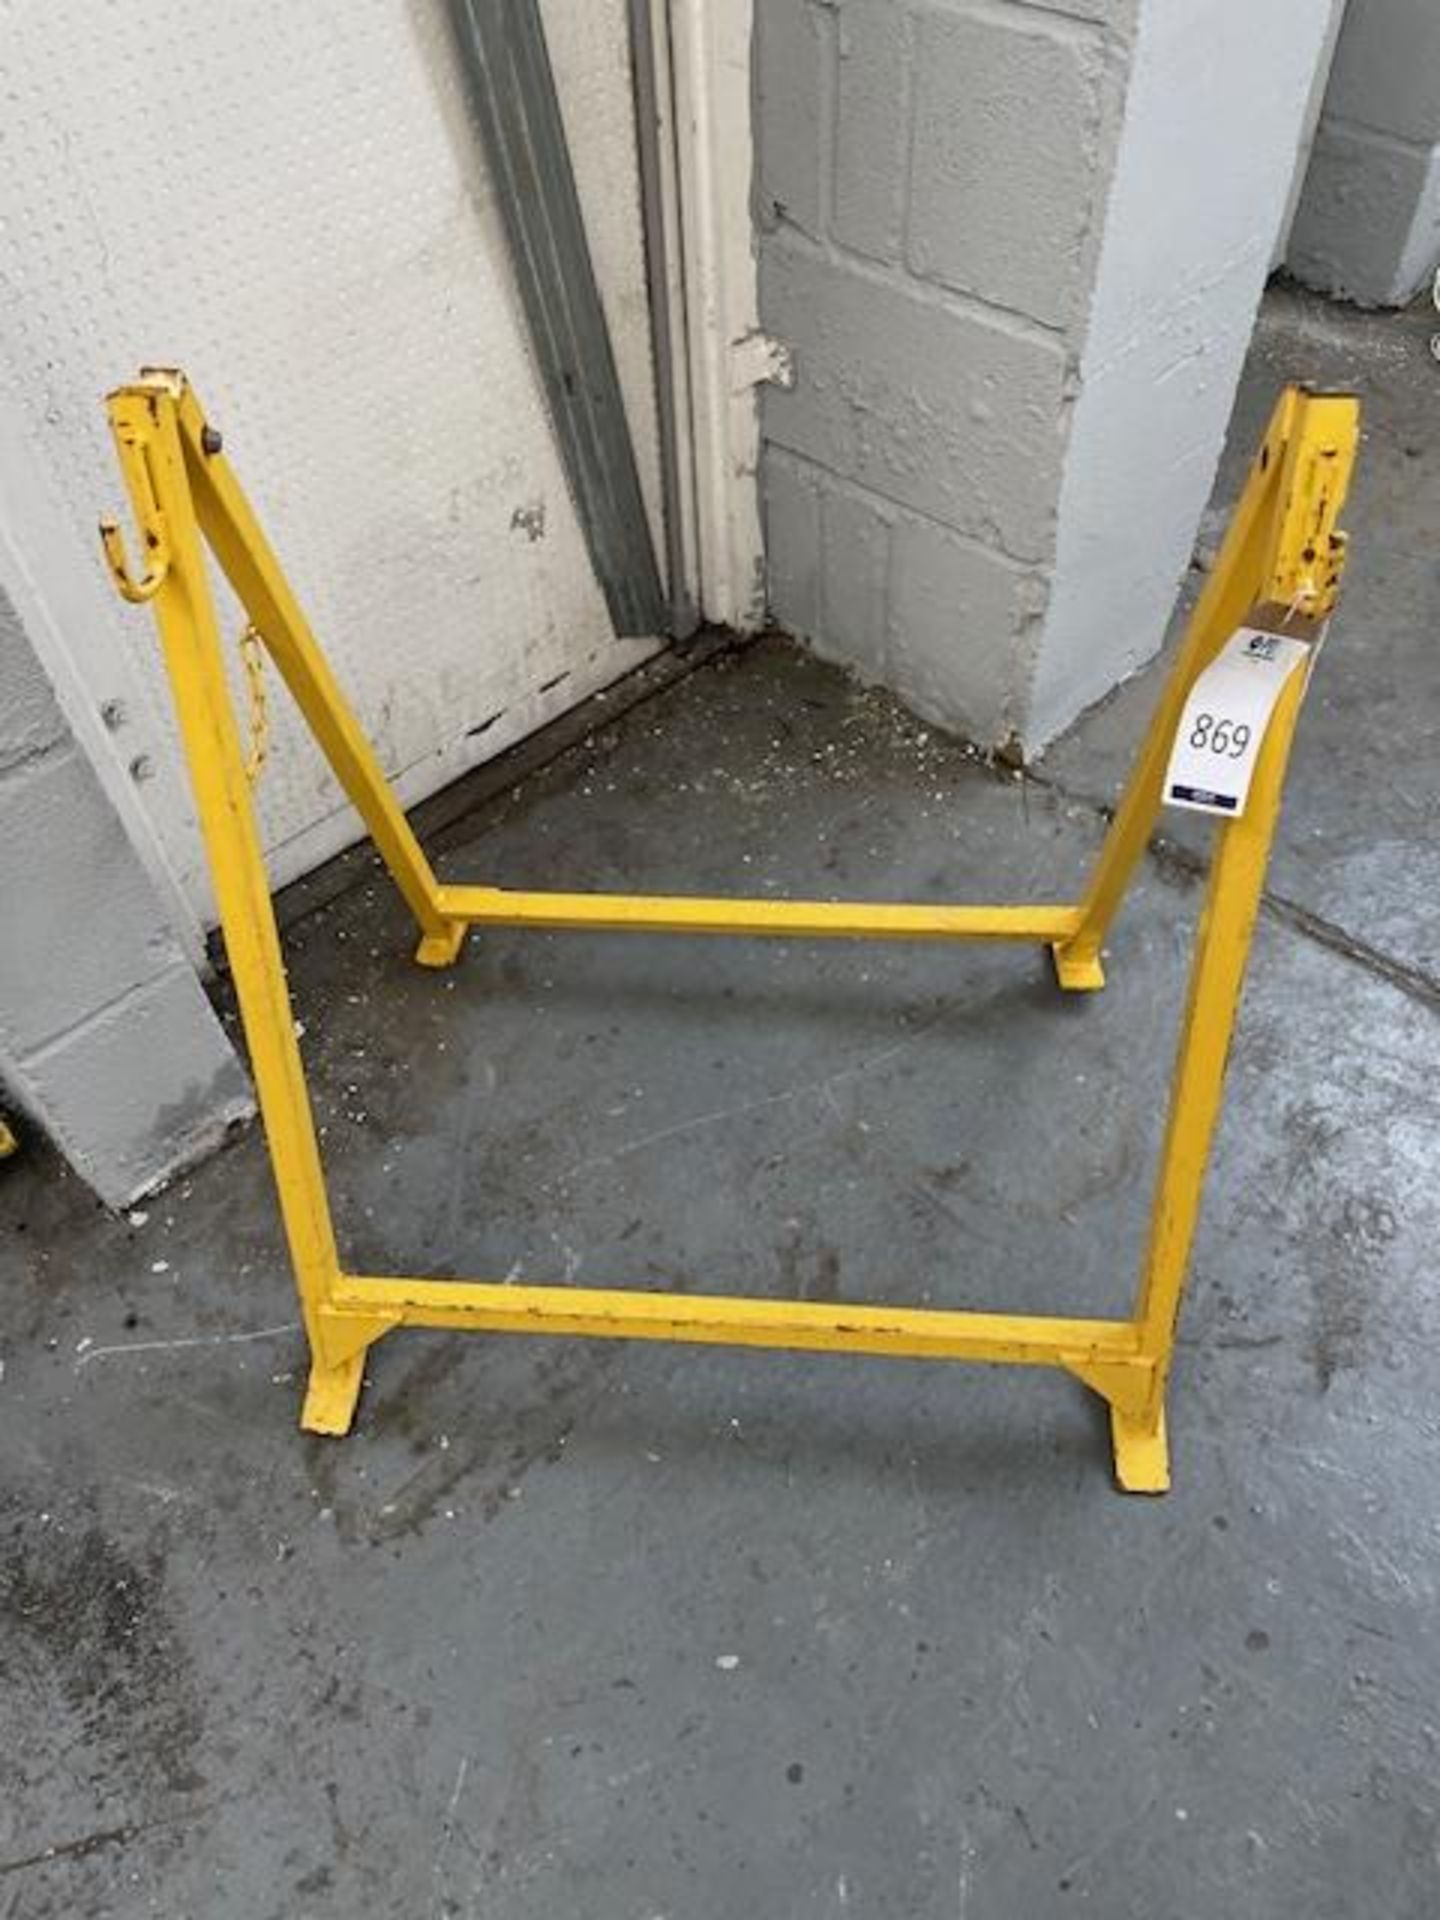 10 Folding Metal Stands etc. (Location: Harlow. Please Refer to General Notes)